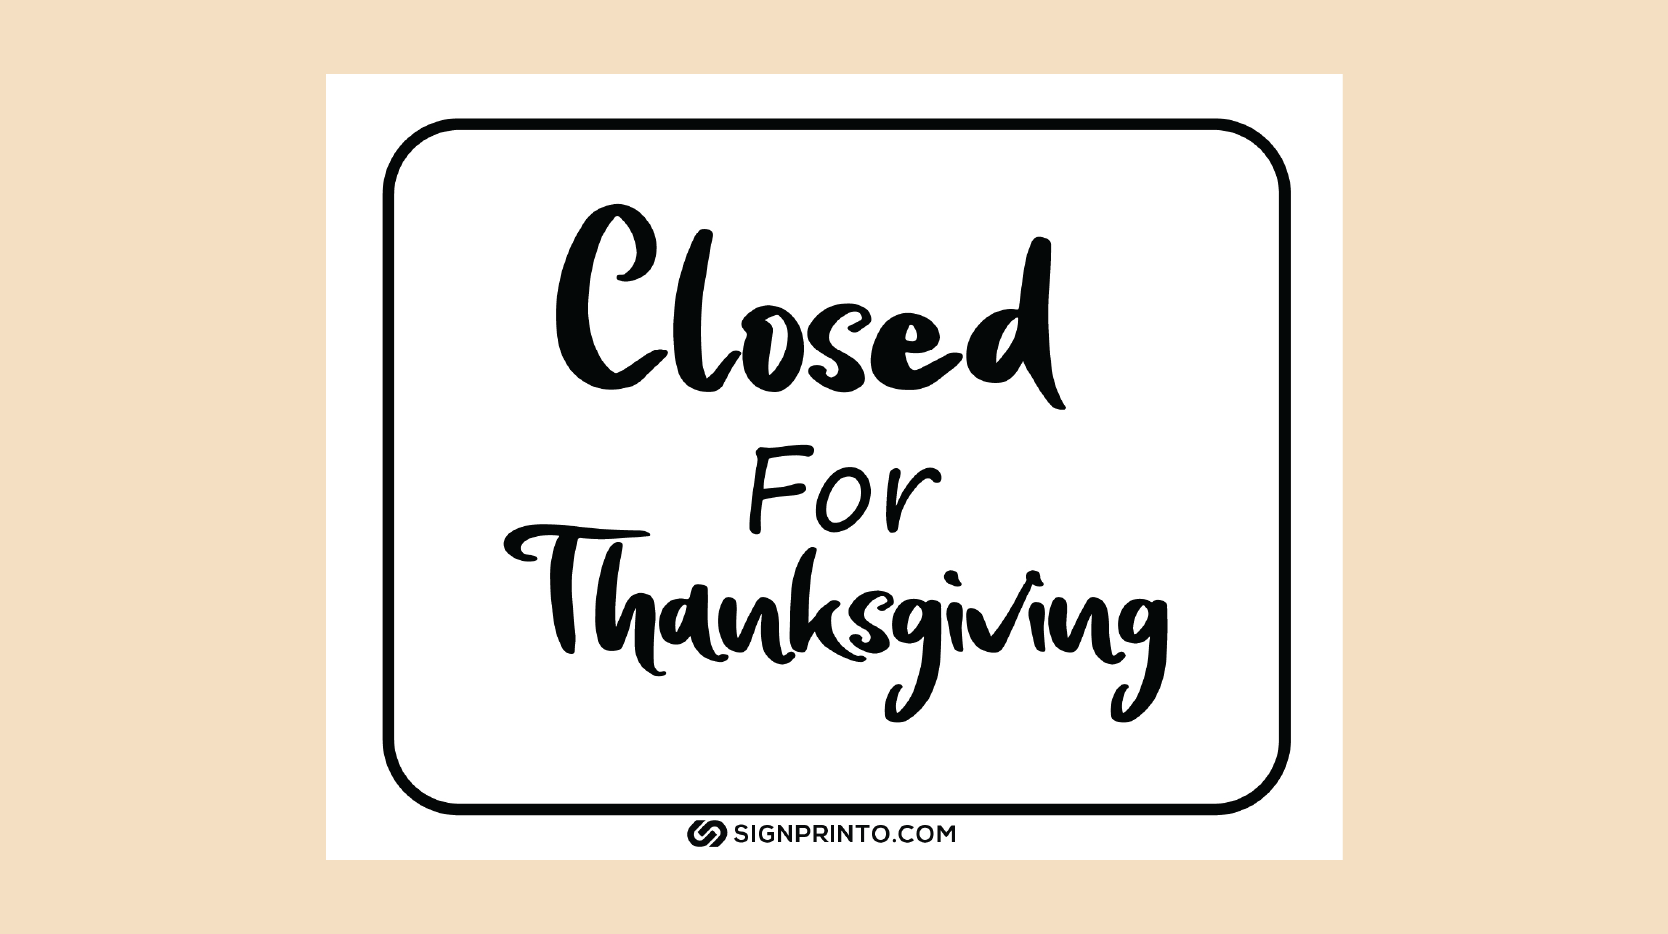 Closed for Thanksgiving sign